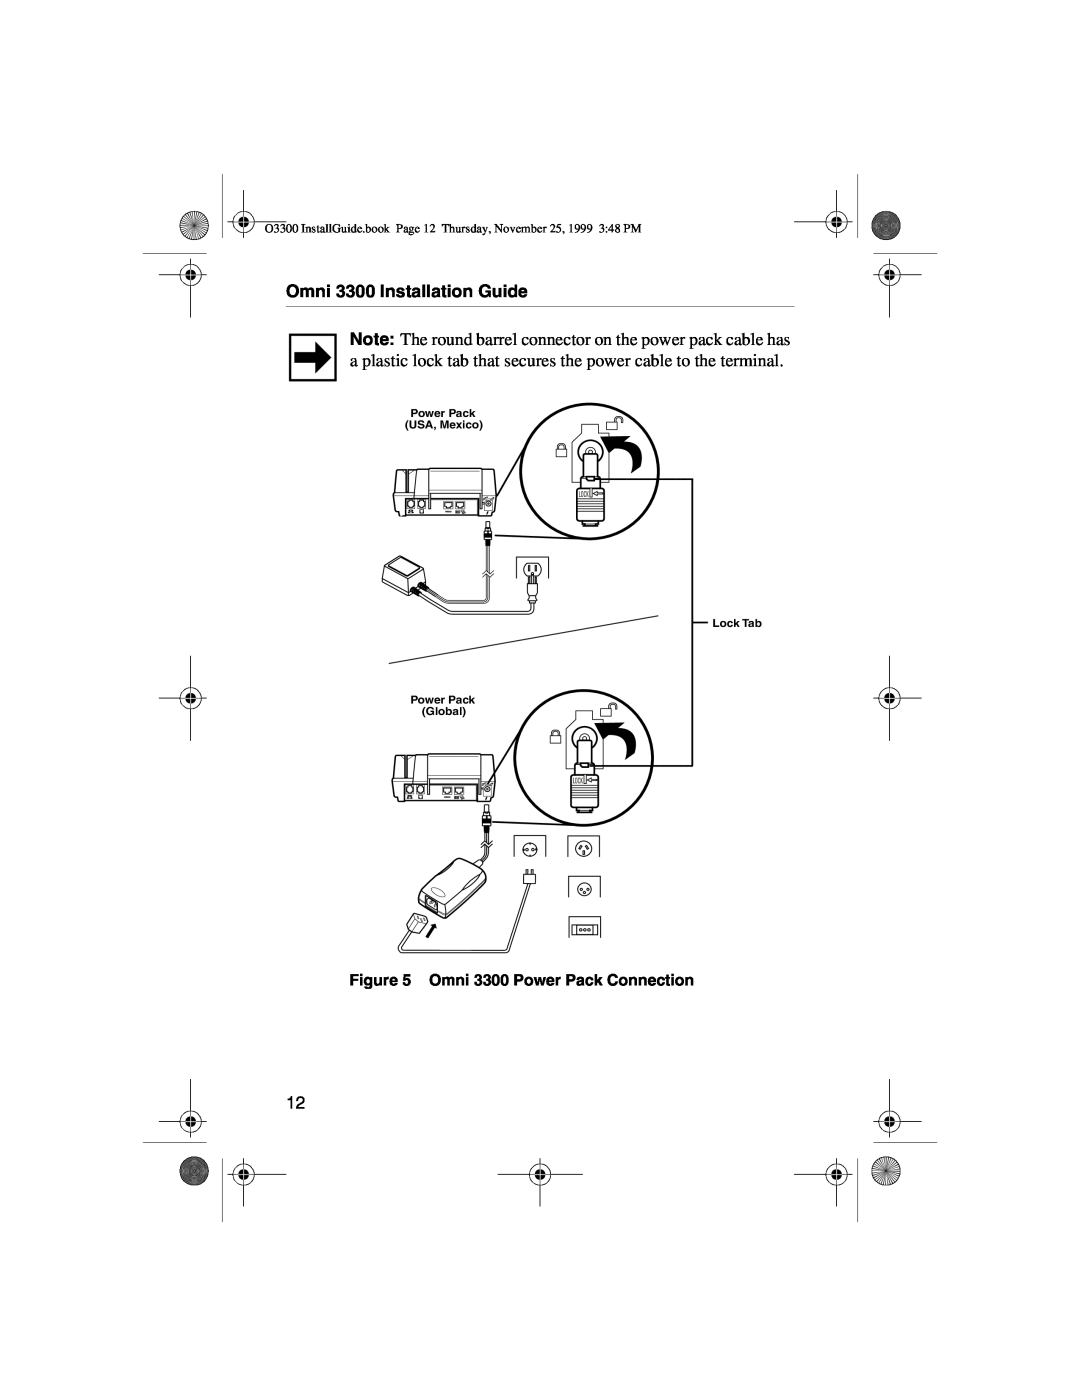 VeriFone manual Omni 3300 Installation Guide, Omni 3300 Power Pack Connection 